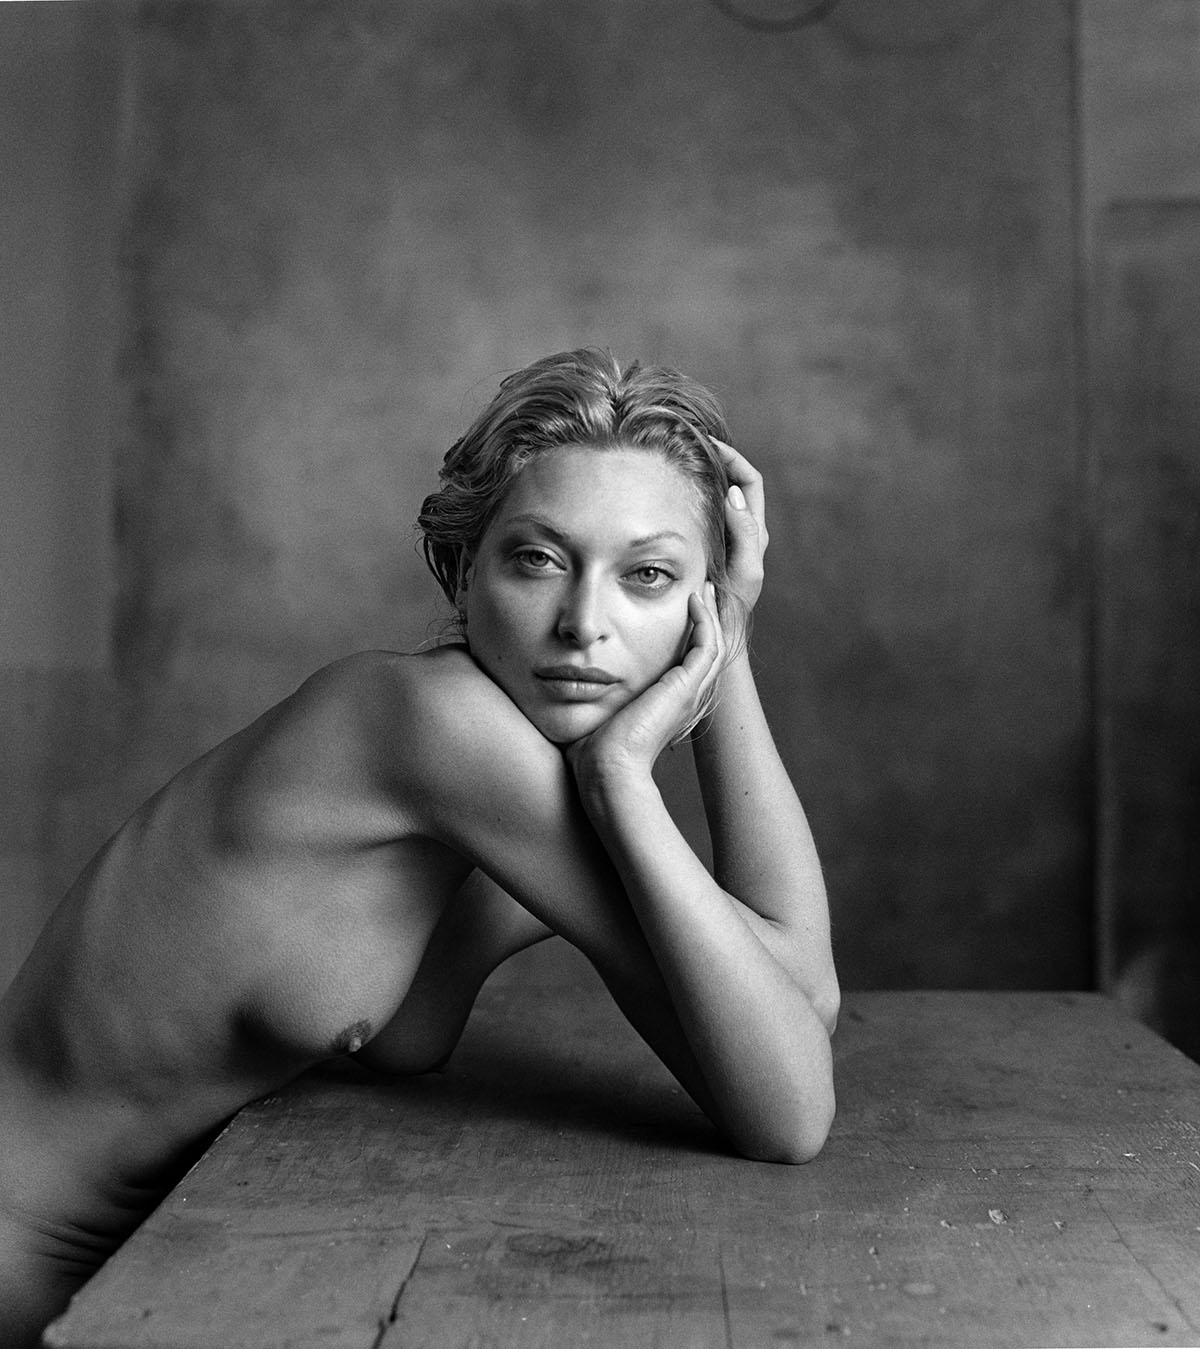 ...clair-obscur.Christian Coigny’s work consists of soft and sensual nudes